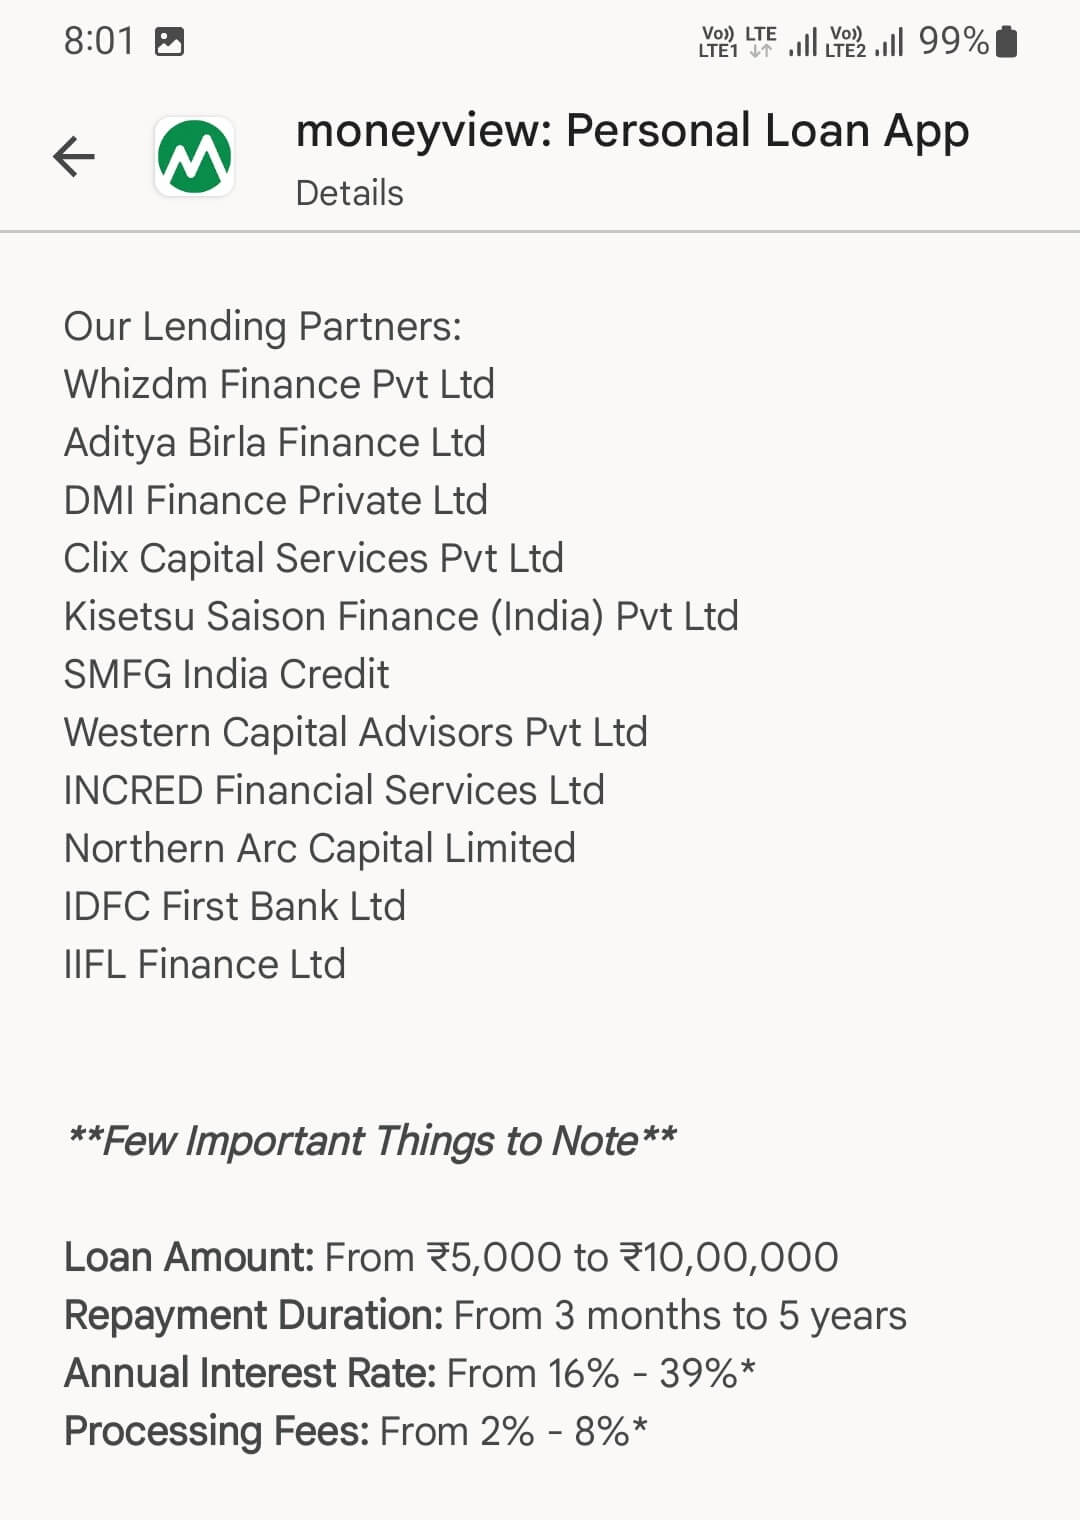 About this section me NBFC or RBI partnership dekhe